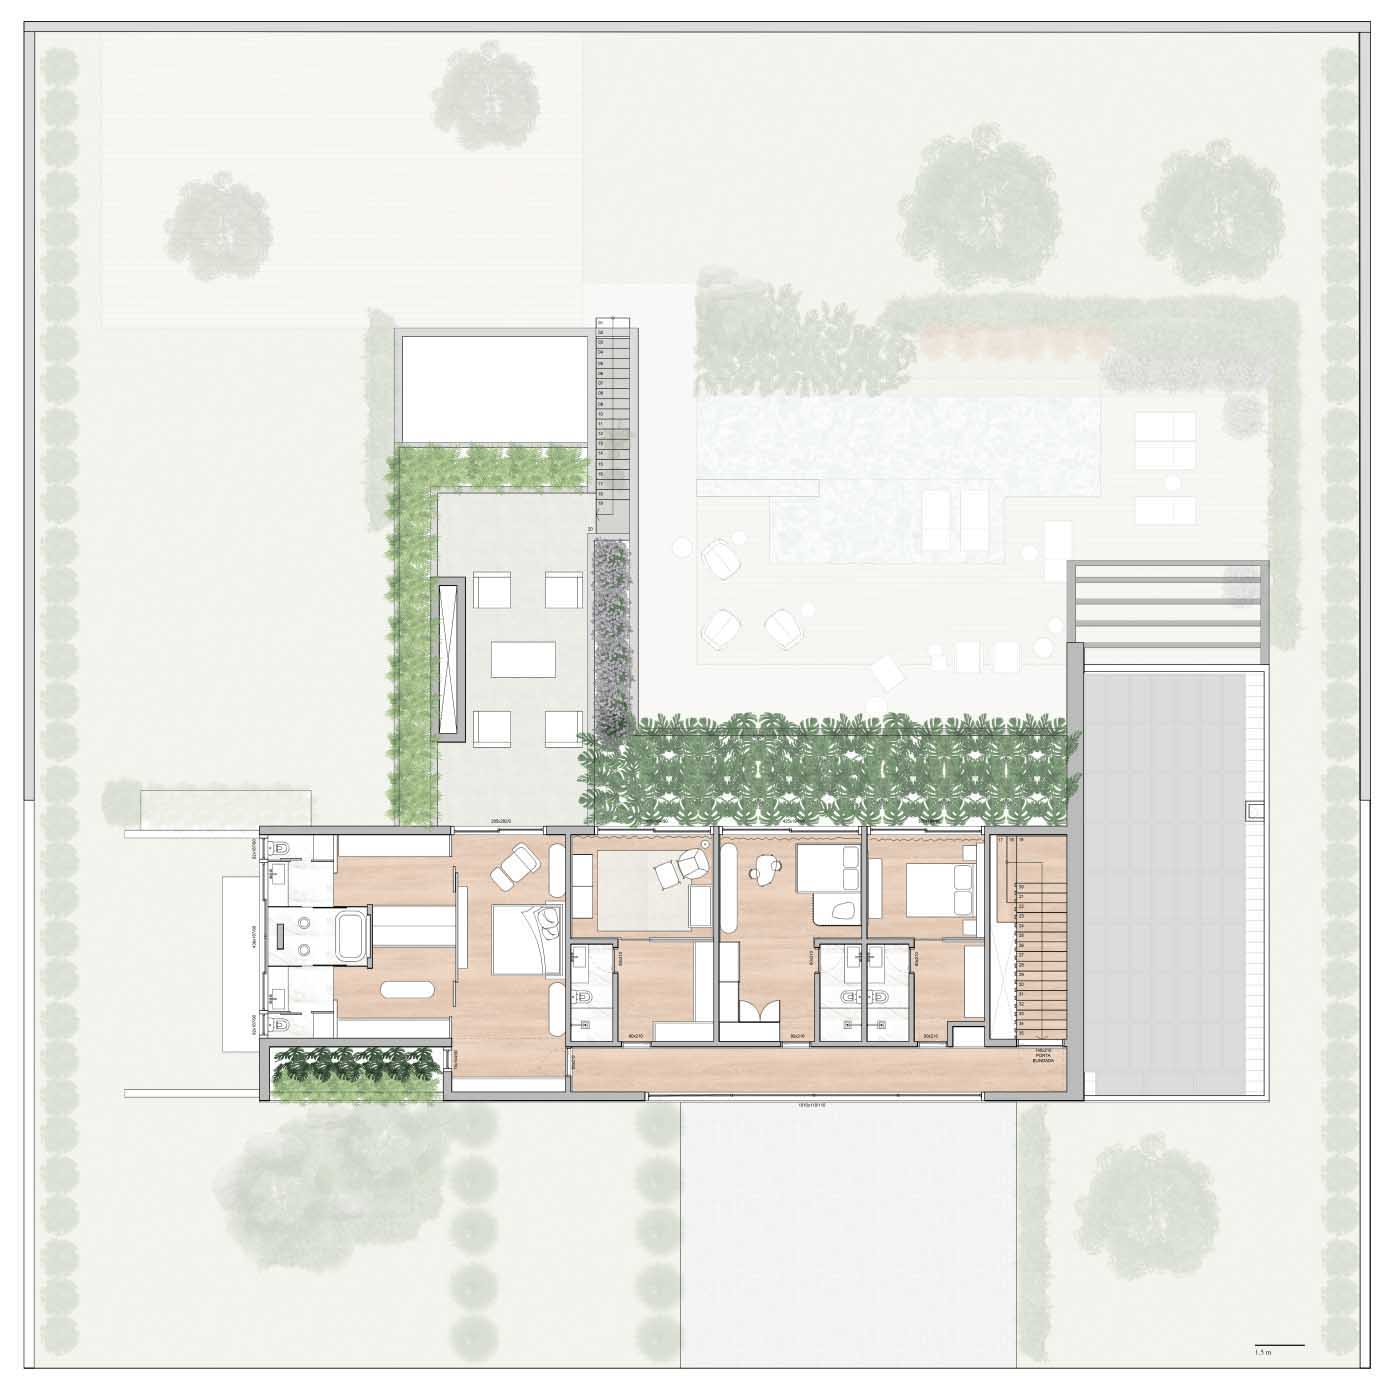 The floor plan of a modern two storey home.